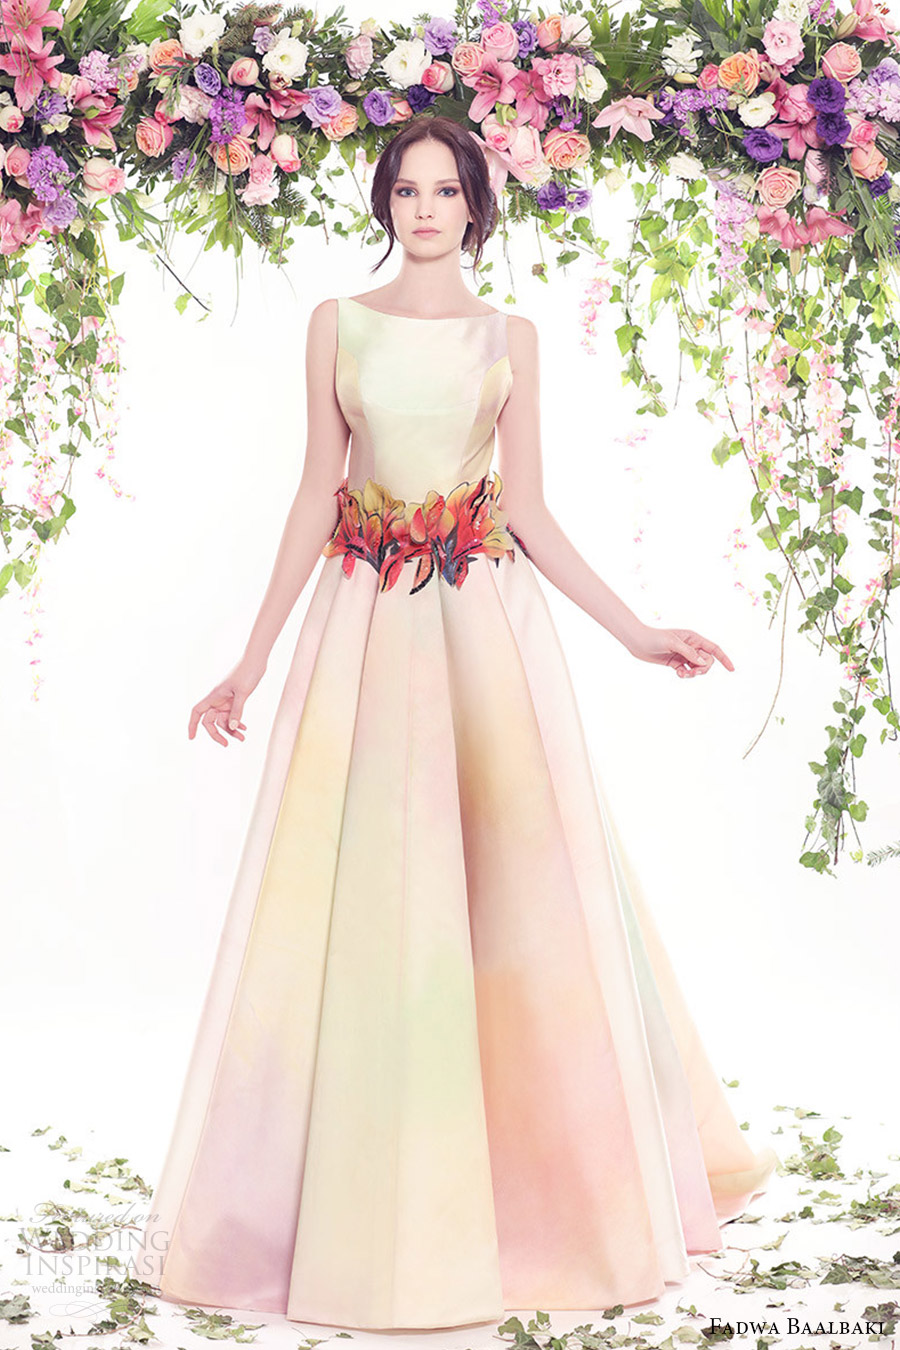 fadwa baalbaki spring 2016 couture sleeveless bateau neck ball gown multi color floral mv